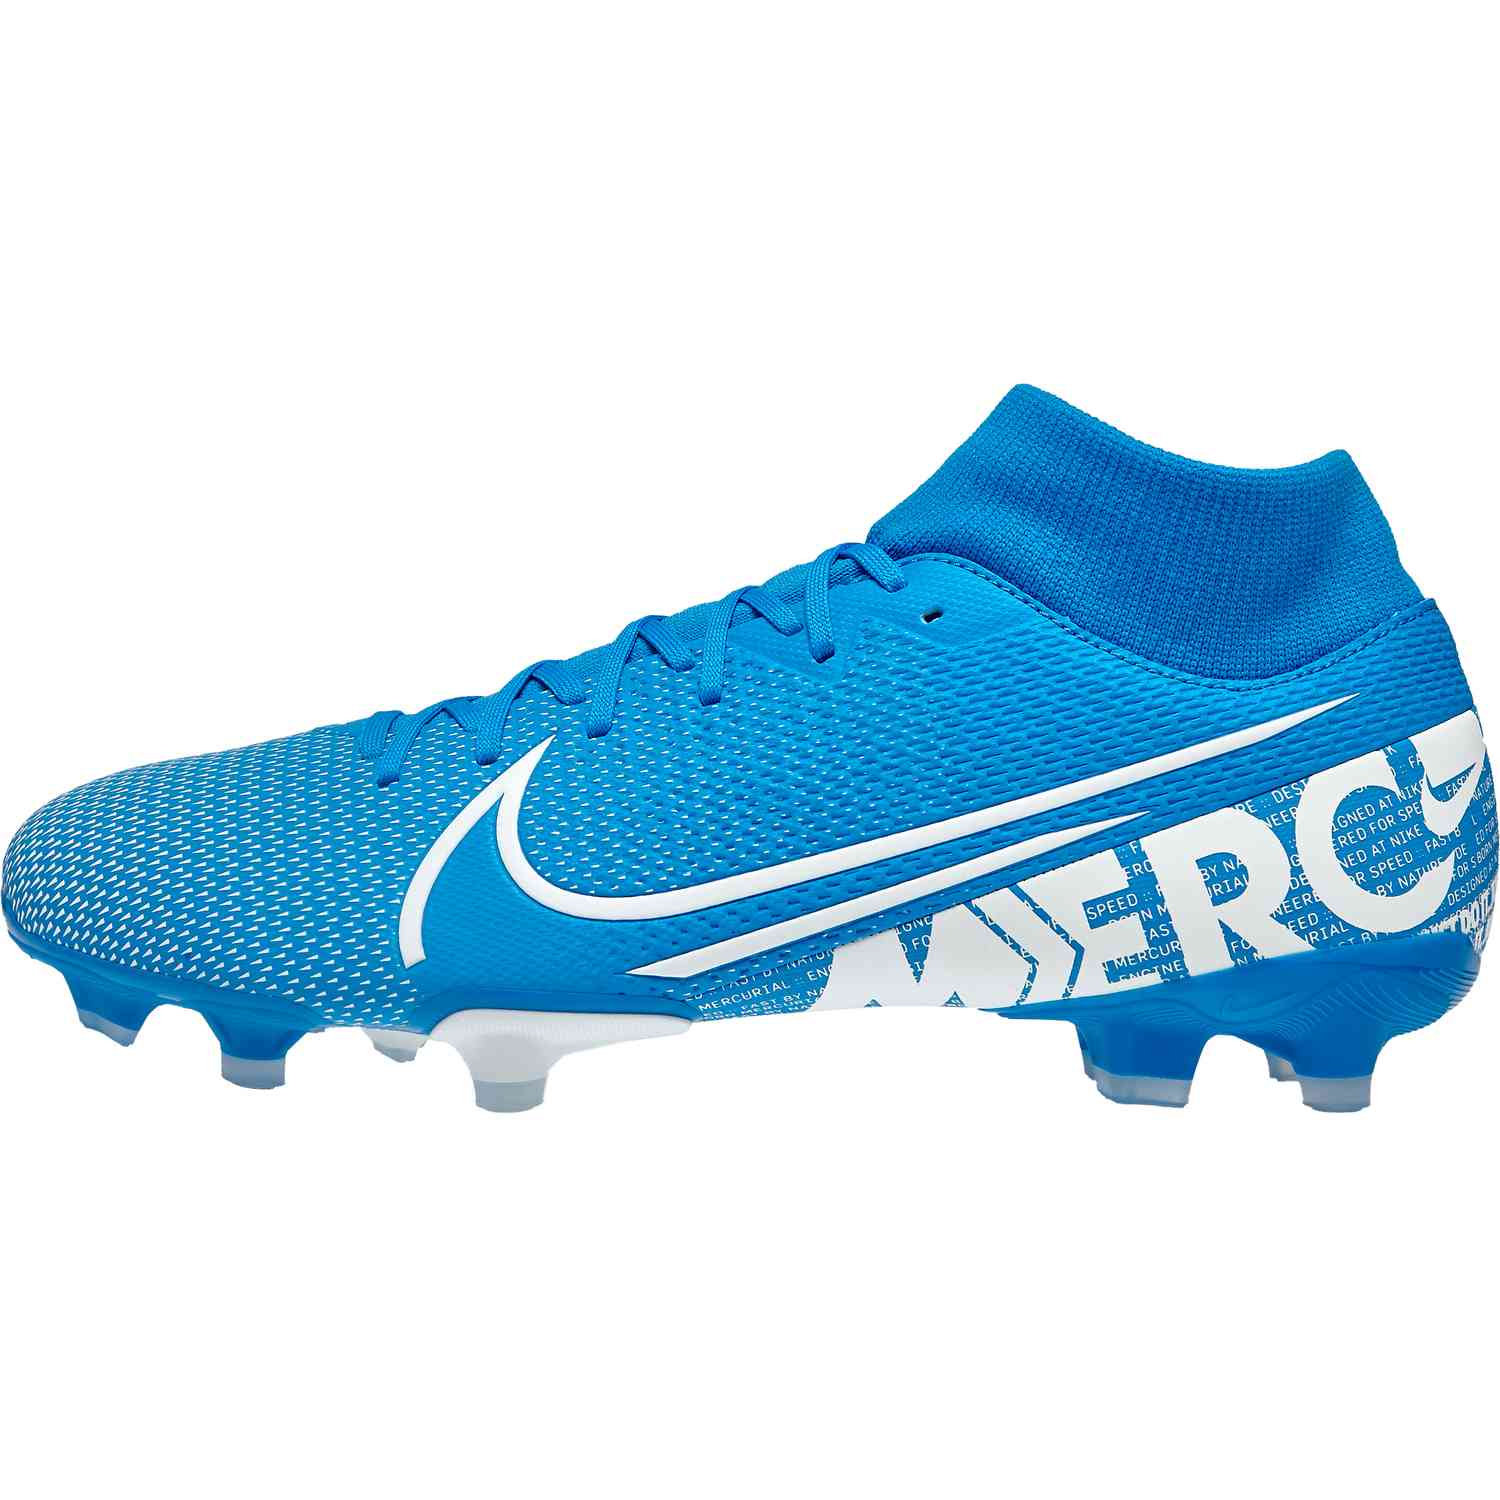 Nike Mercurial Superfly 7 Academy IC 606 at idealo.de